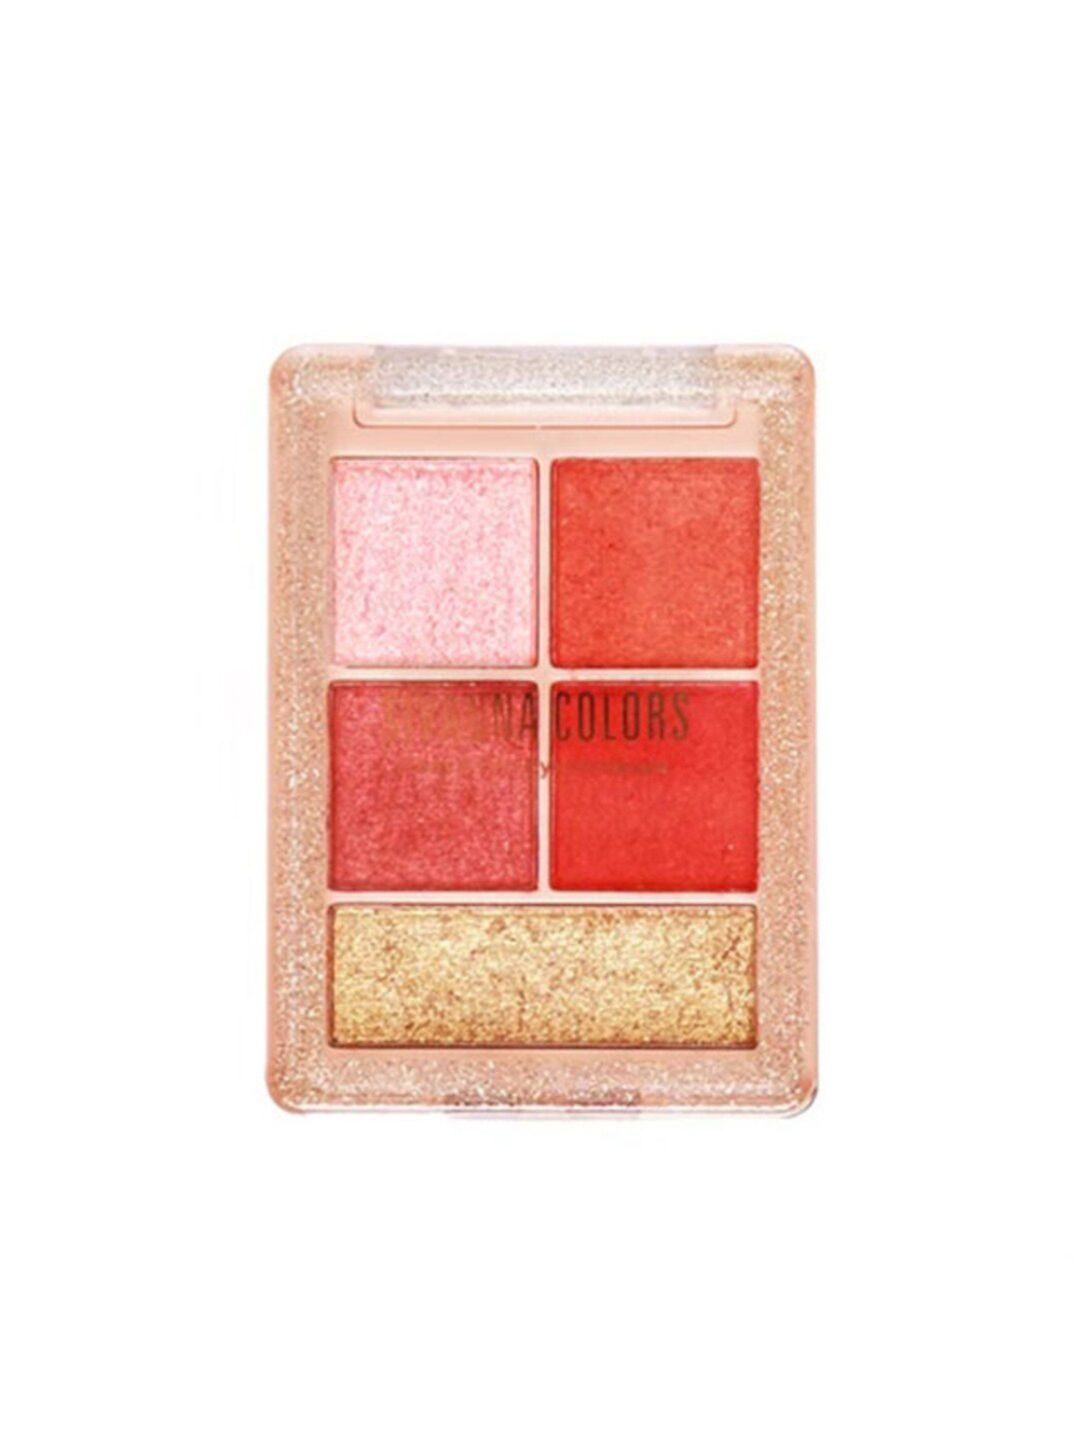 Sivanna Colors In The Peach Pro Mini Eye Shadow Palette - HF6031 01 Price in India